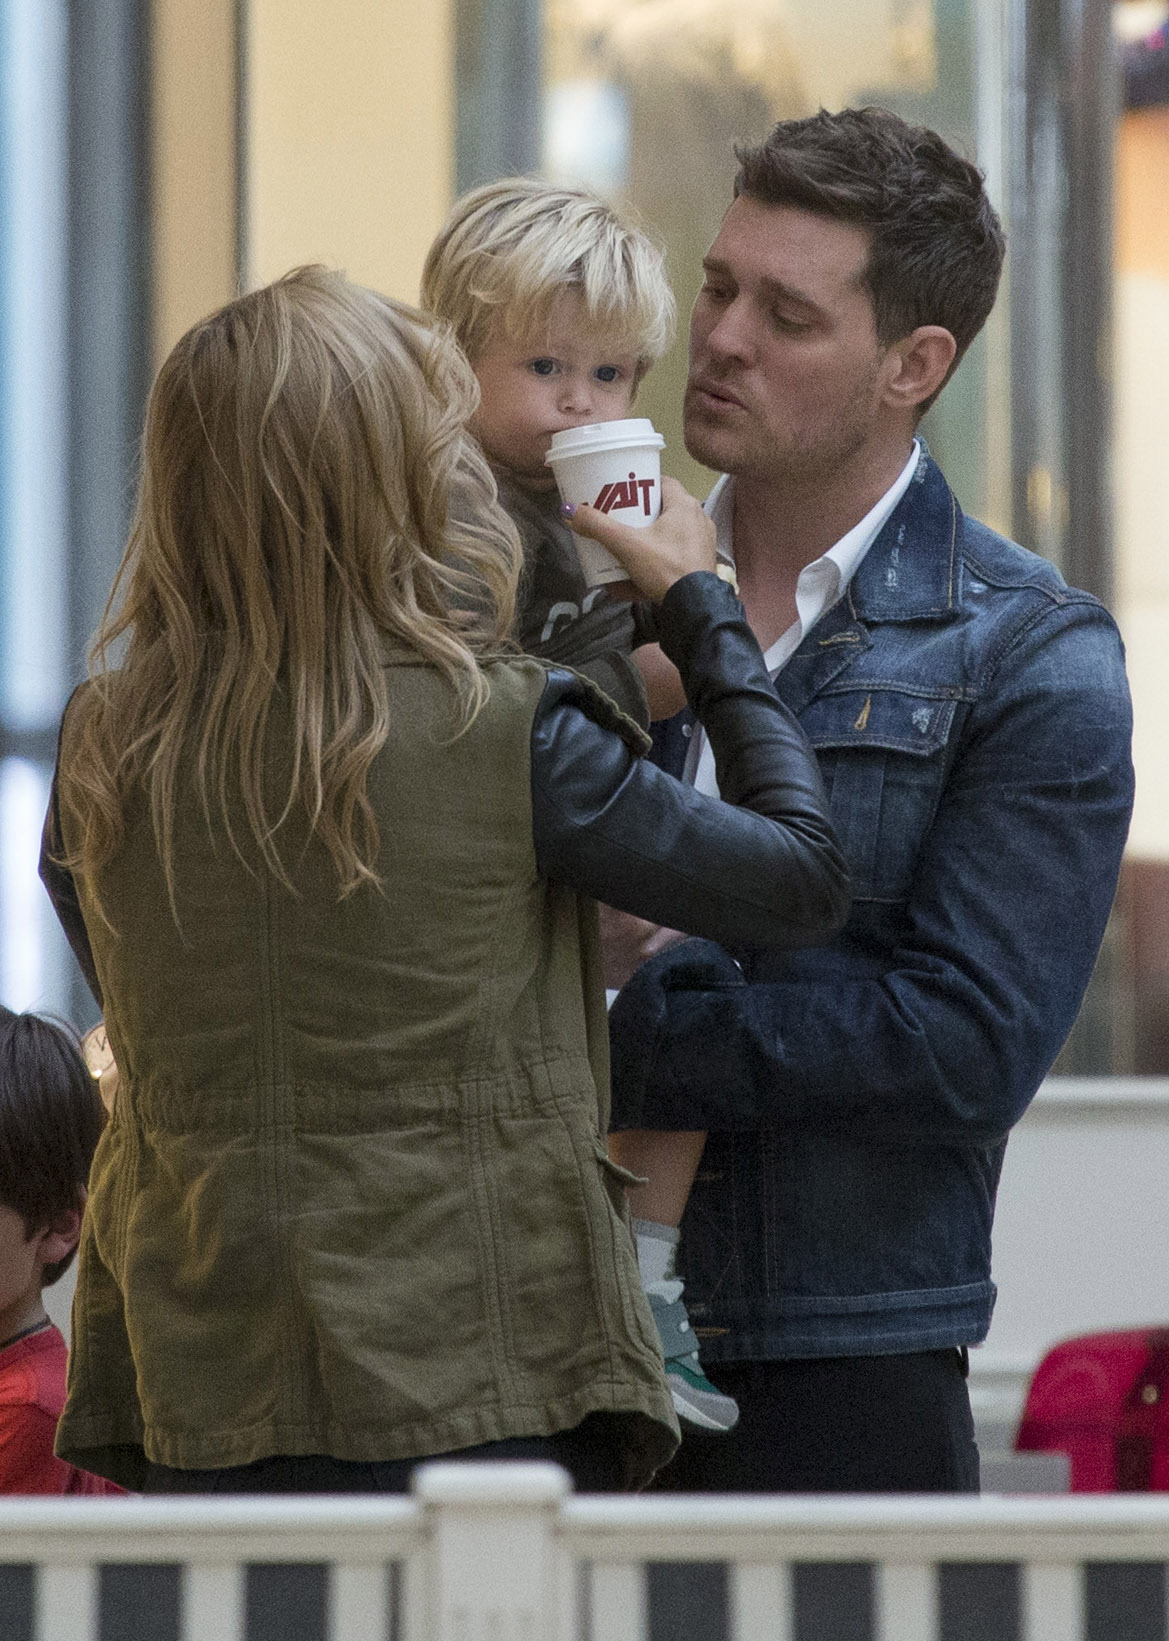 Michael Buble and Luisana Lopilato are seen with their son Noah on April 28, 2015 in Madrid, Spain. | Source: Getty Images